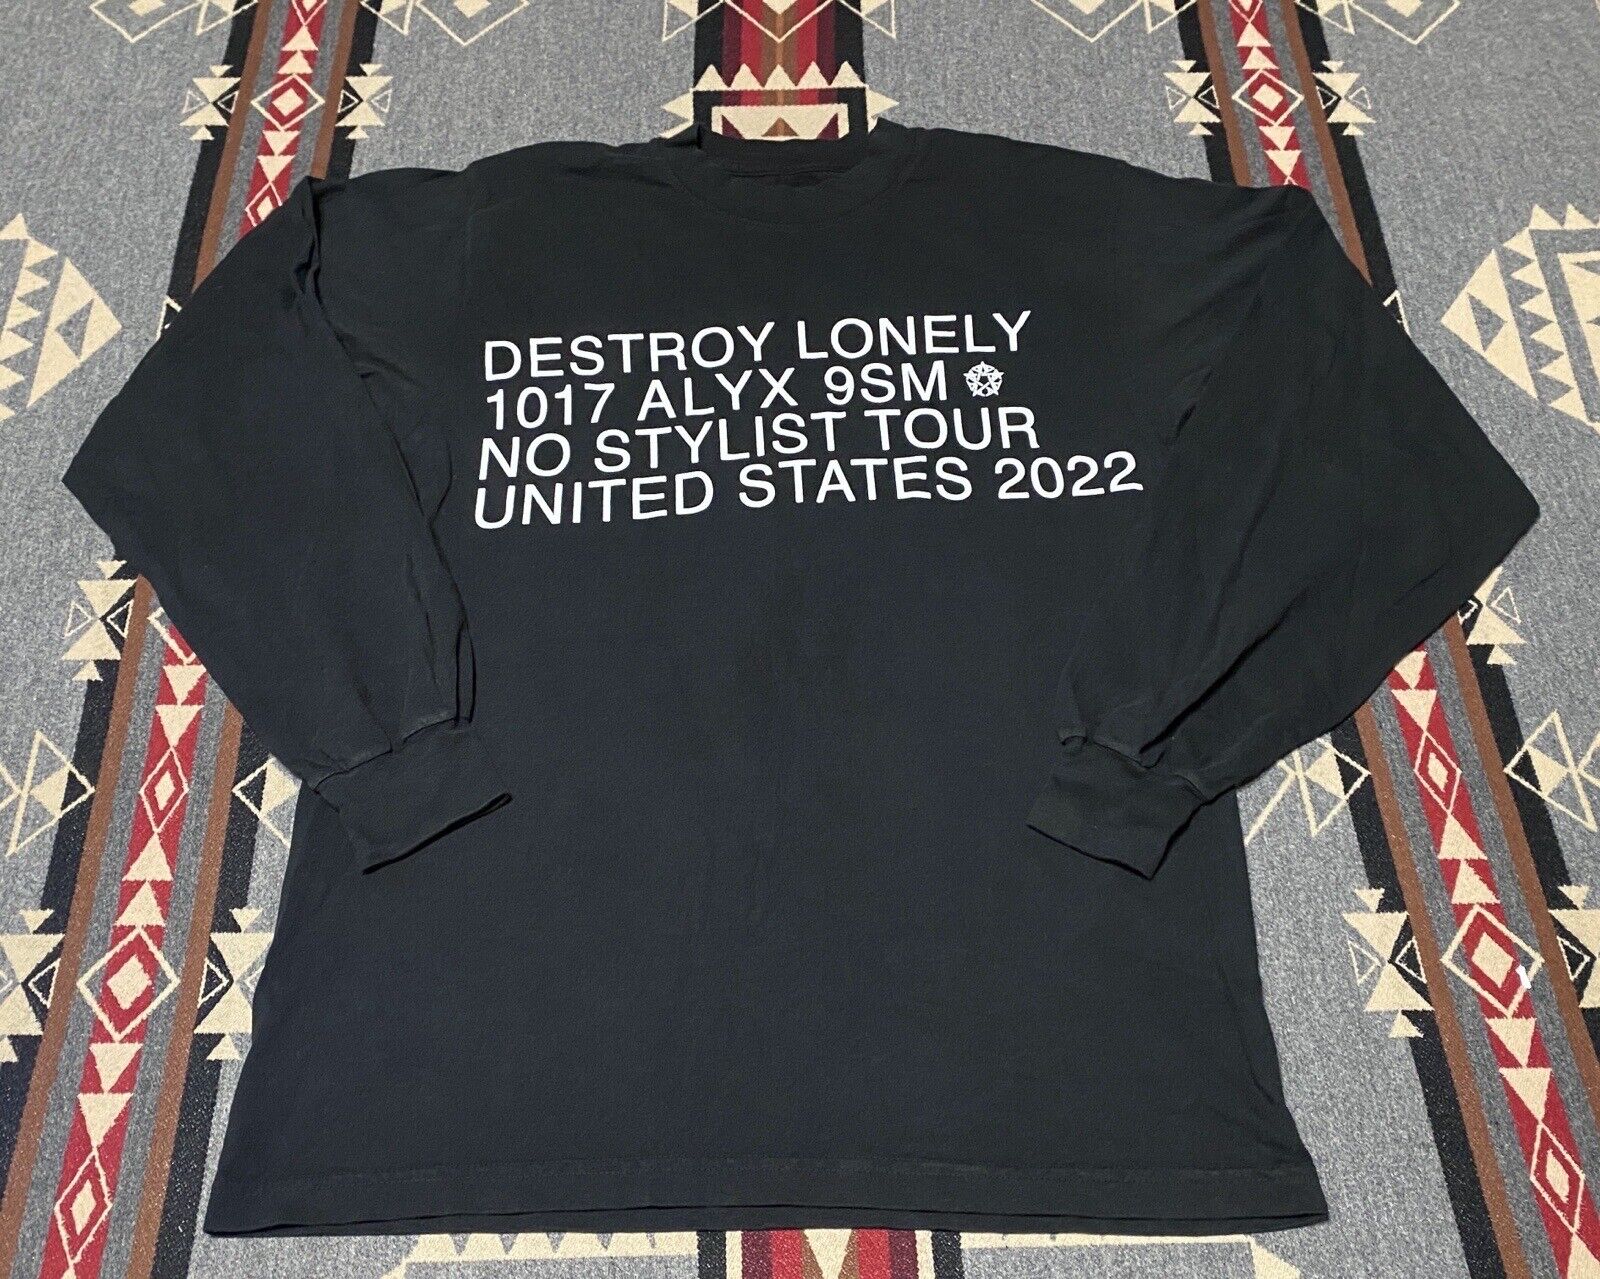 Destroy Lonely 1017 Alyx SSN No Stylist Tour Long Sleeve Shirt 2022 Sz S T58